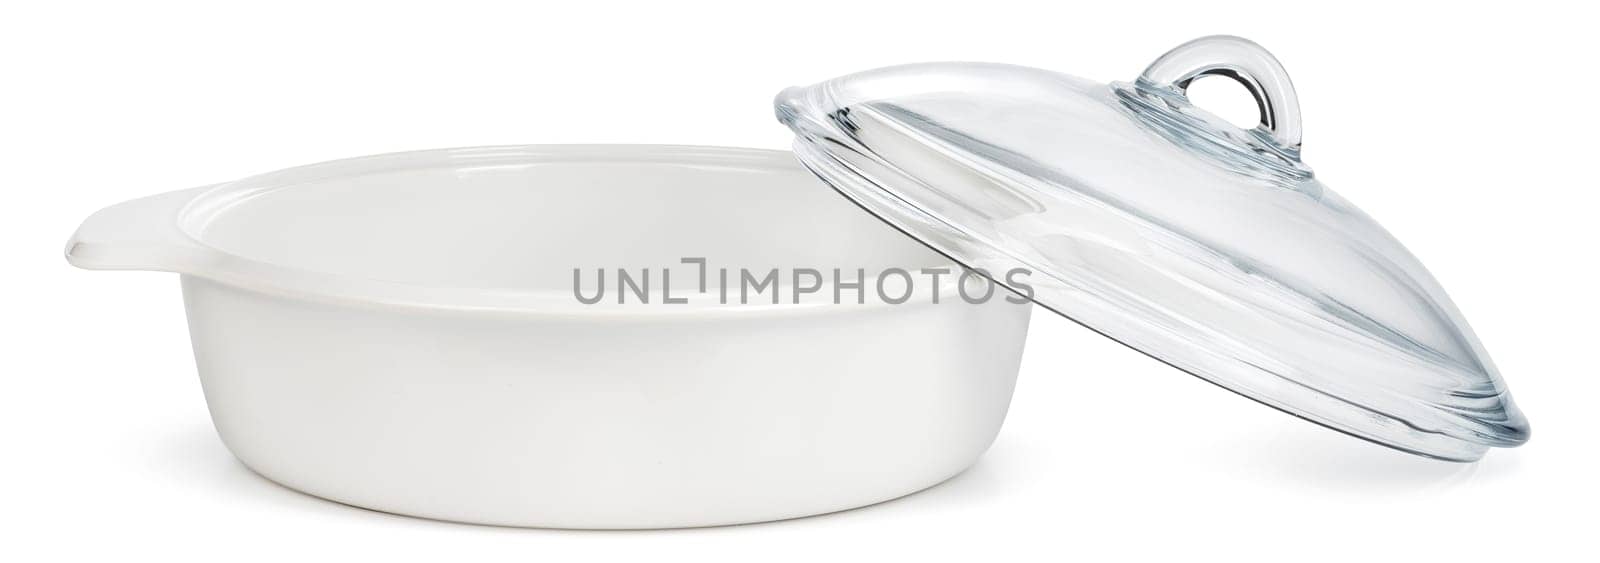 White ceramic cooking pot isolated on a white background